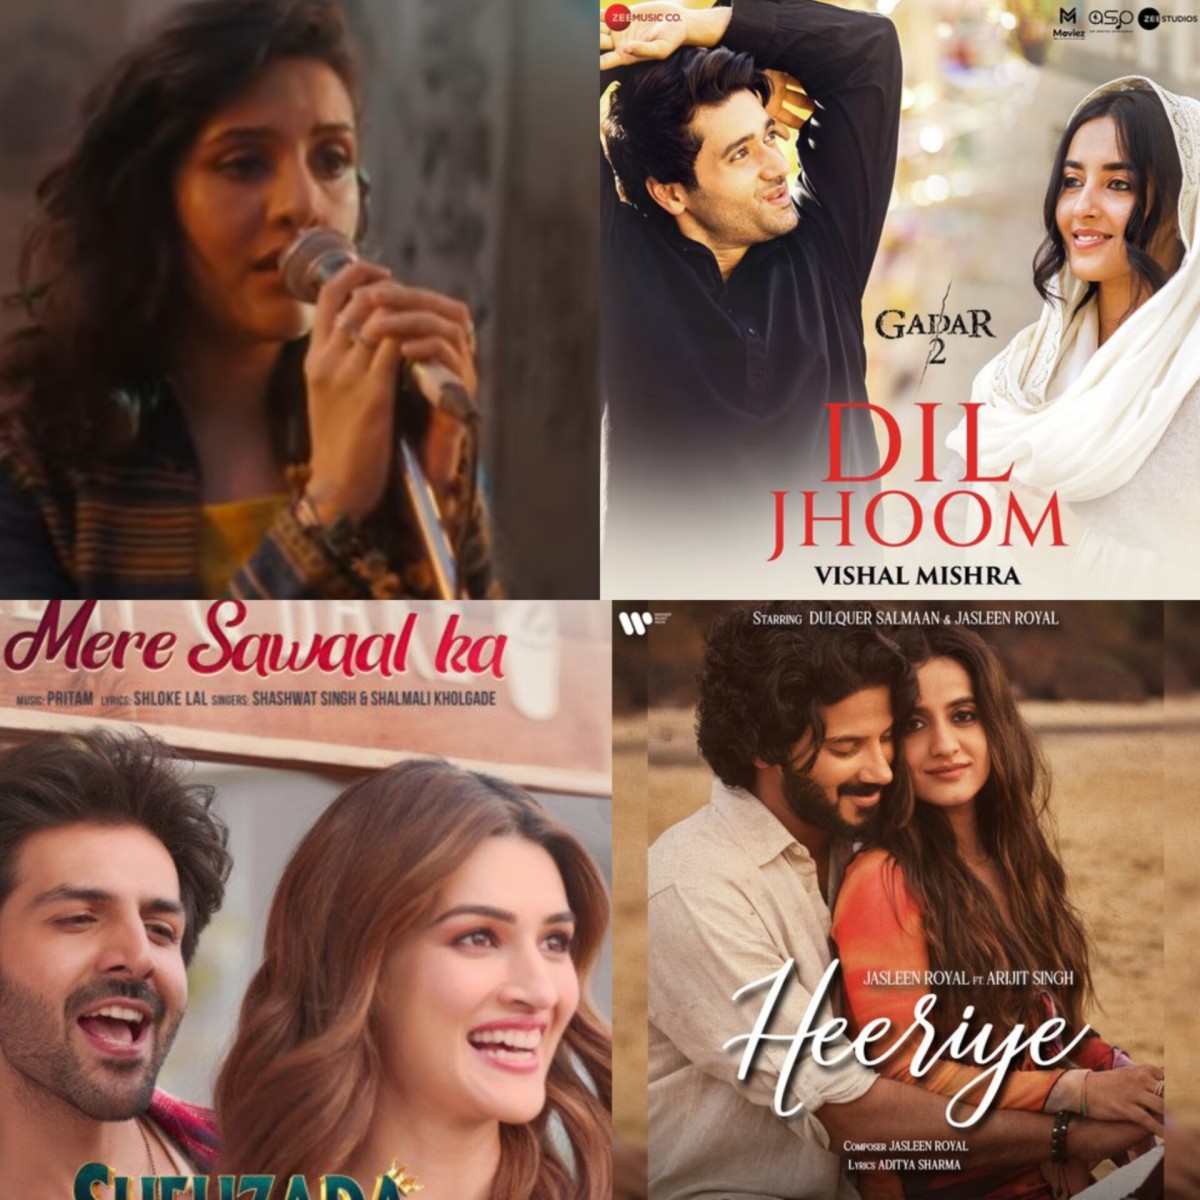 Bollywood songs of the year – Beyond Bollywood